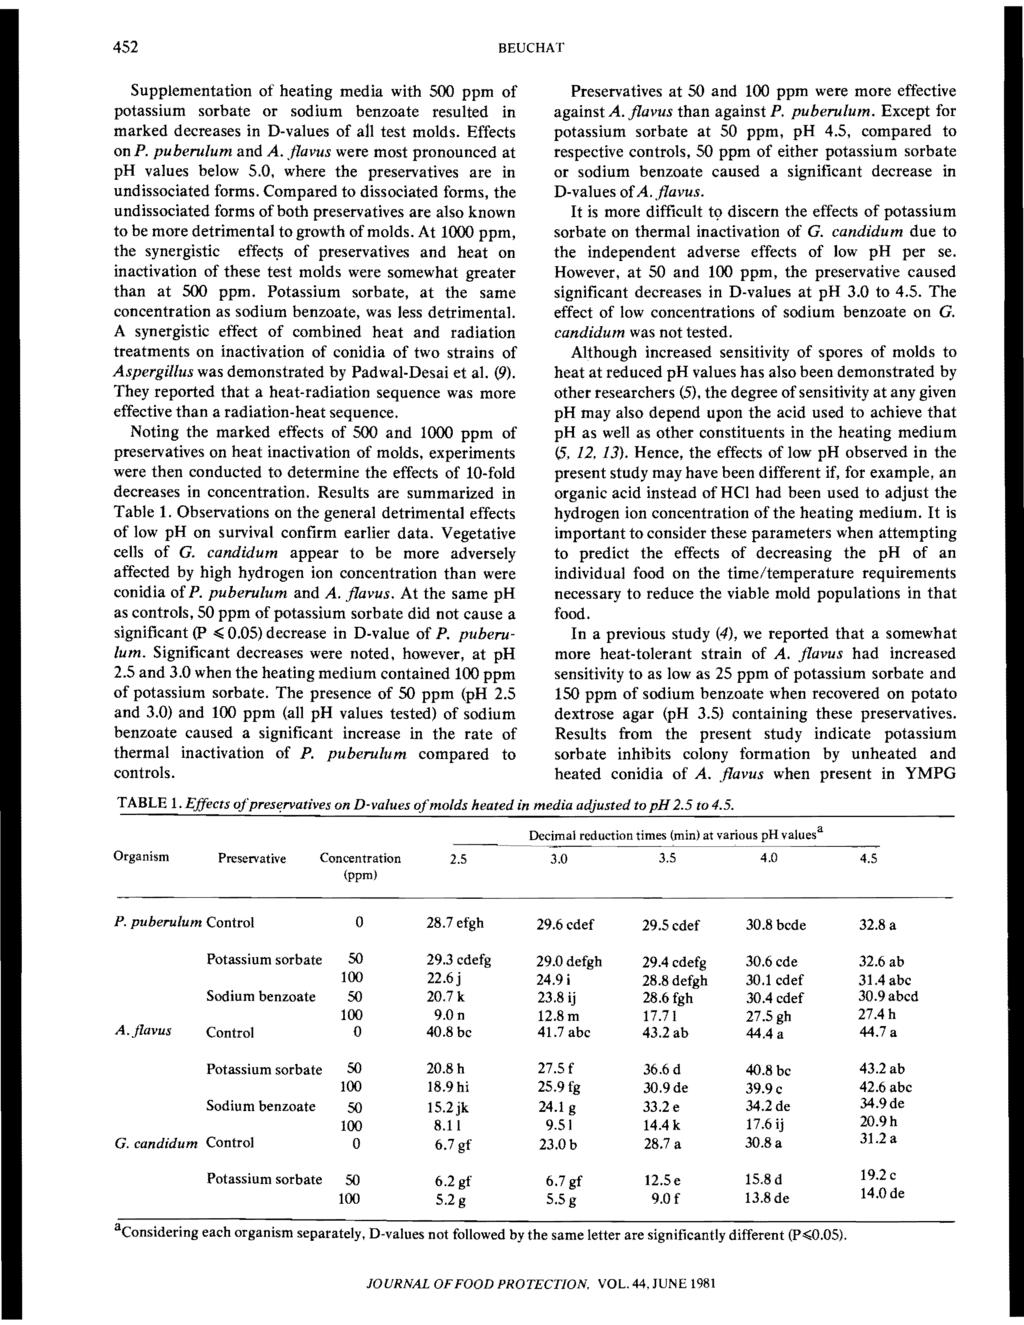 452 BUCHAT Supplementation of heating media with 5 ppm of potassium sorbate or sodium benzoate resulted in marked dereases in D-values of all test molds. ffets on P. puberolum and A.